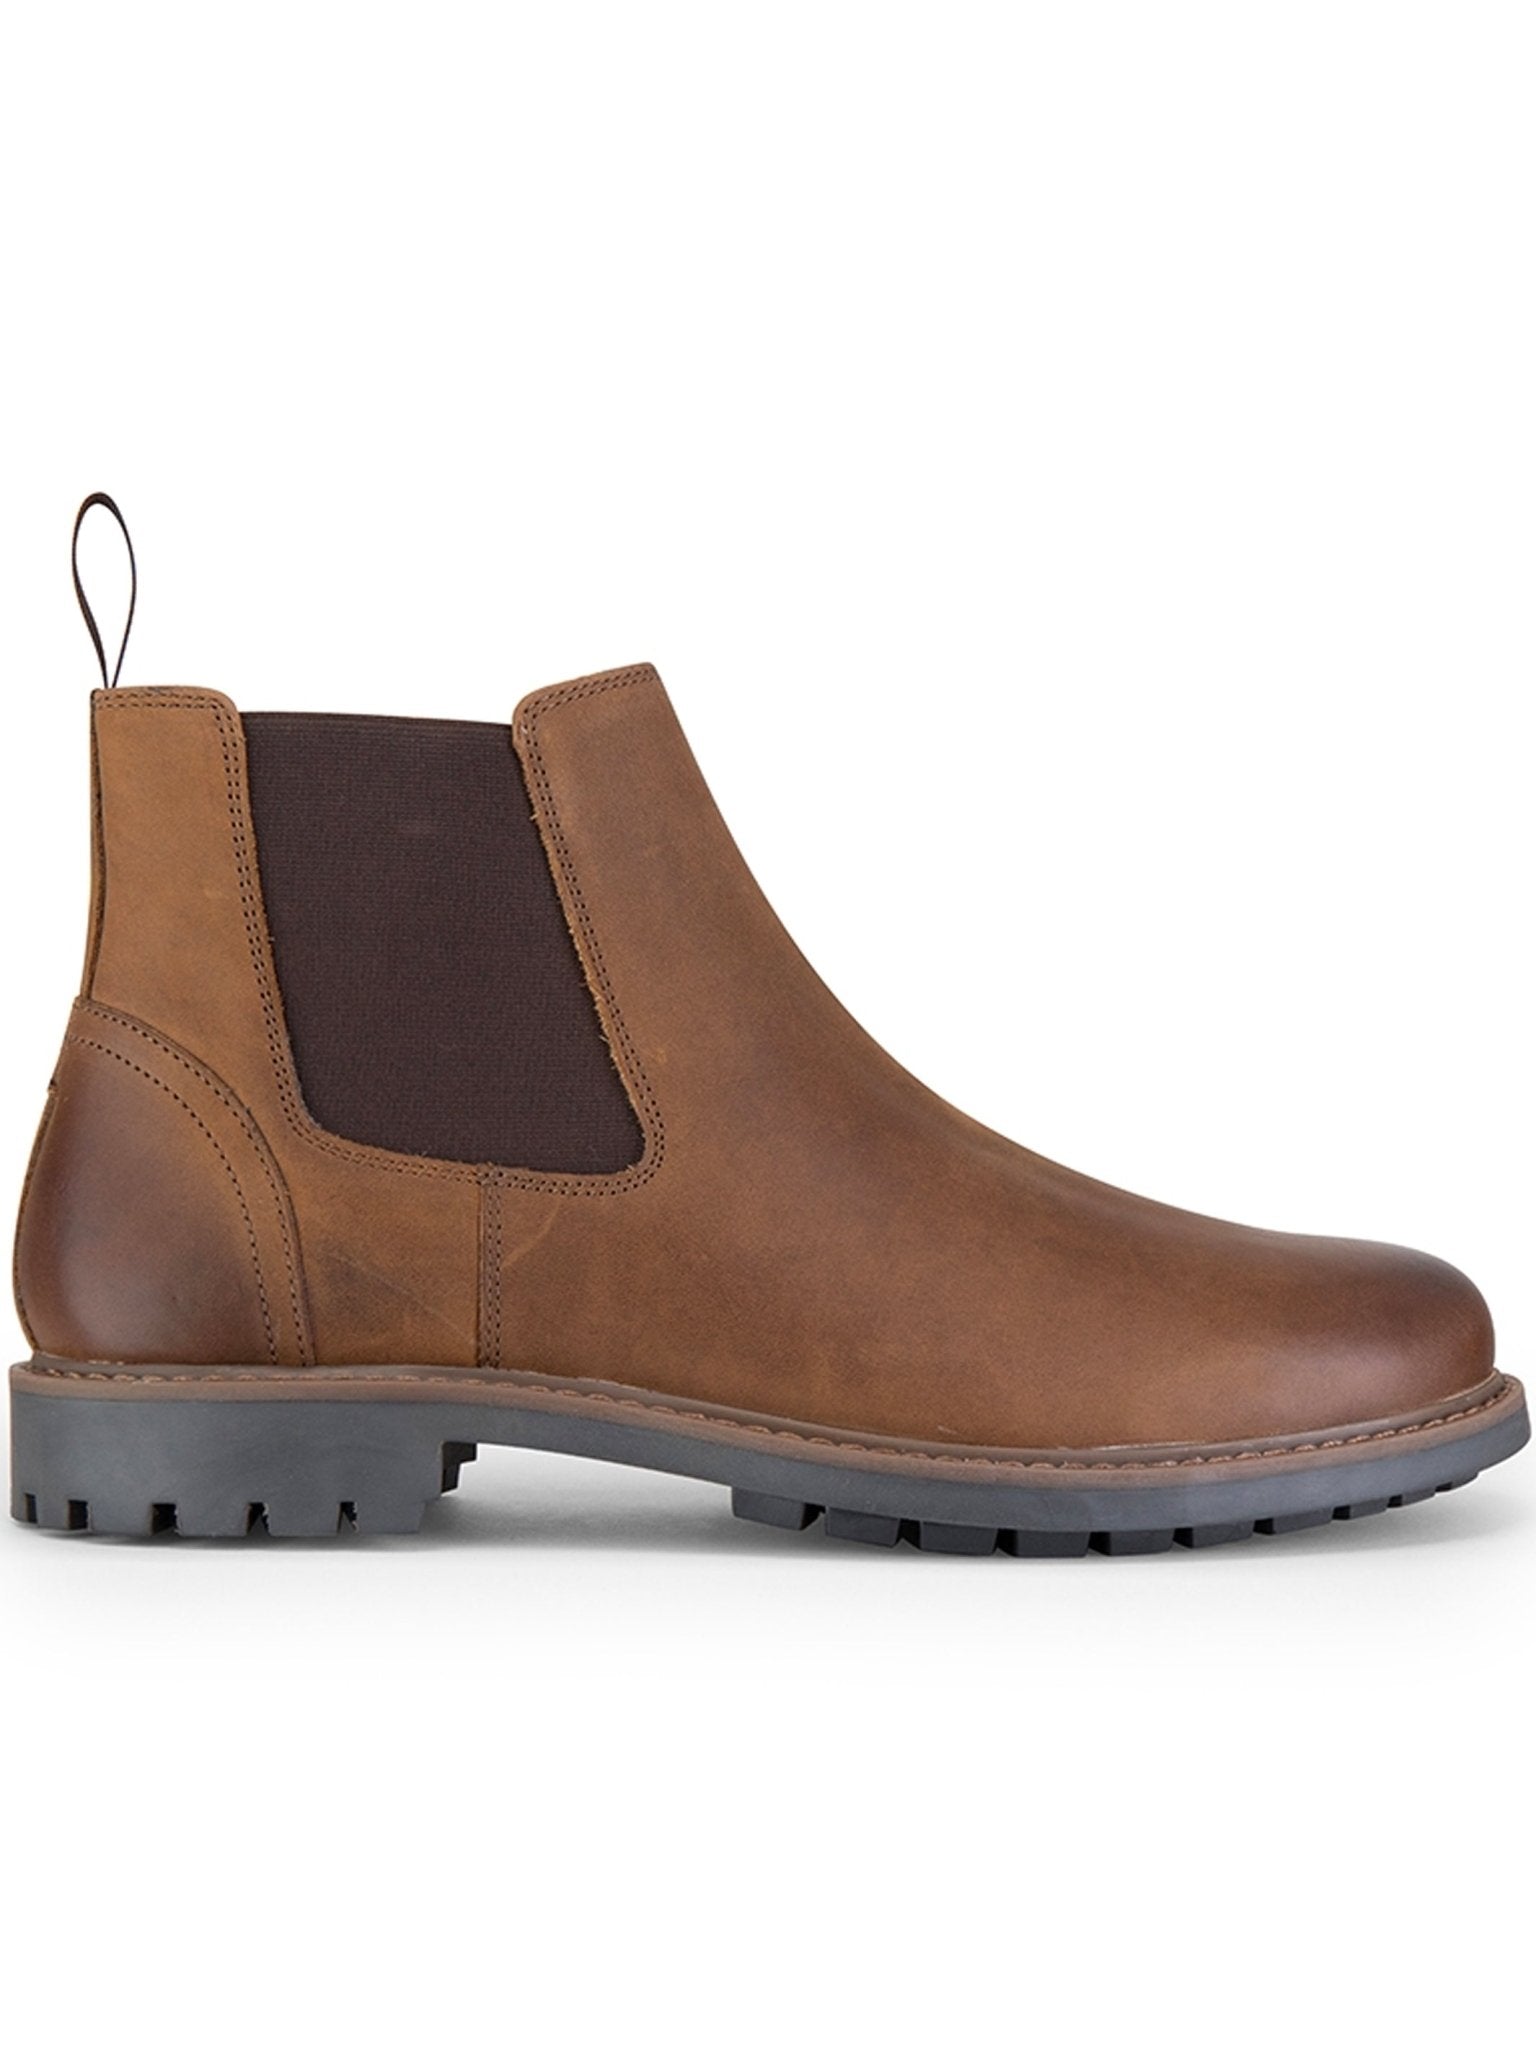 4elementsclothingHoggs of FifeHoggs of Fife - Mens Chelsea Boot / Dealer Boot - Banff Country ClassicBoots4232/WA/40